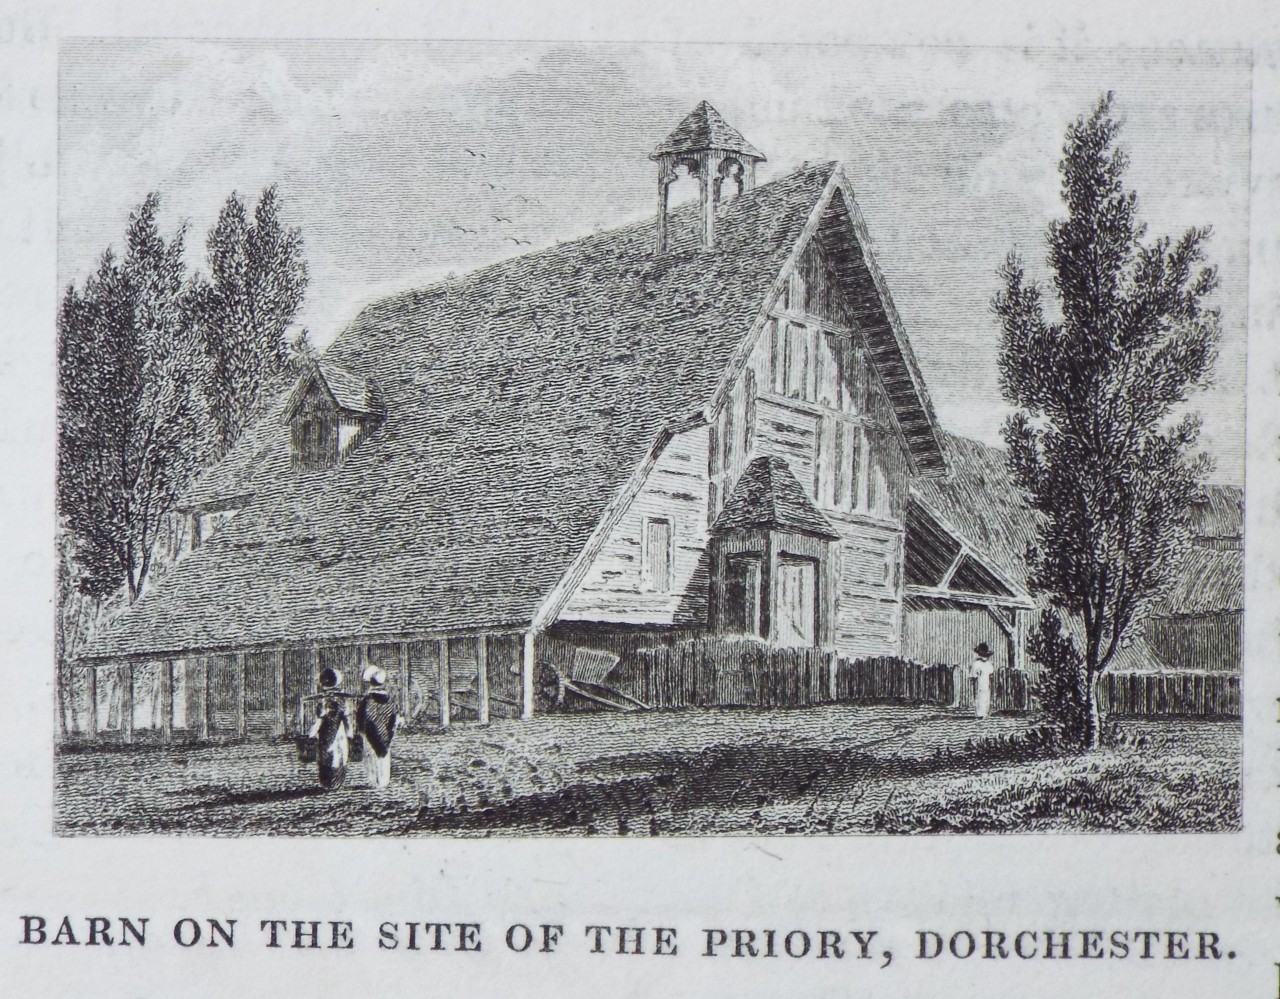 Print - Barn on the Site of the Priory, Dorchester.